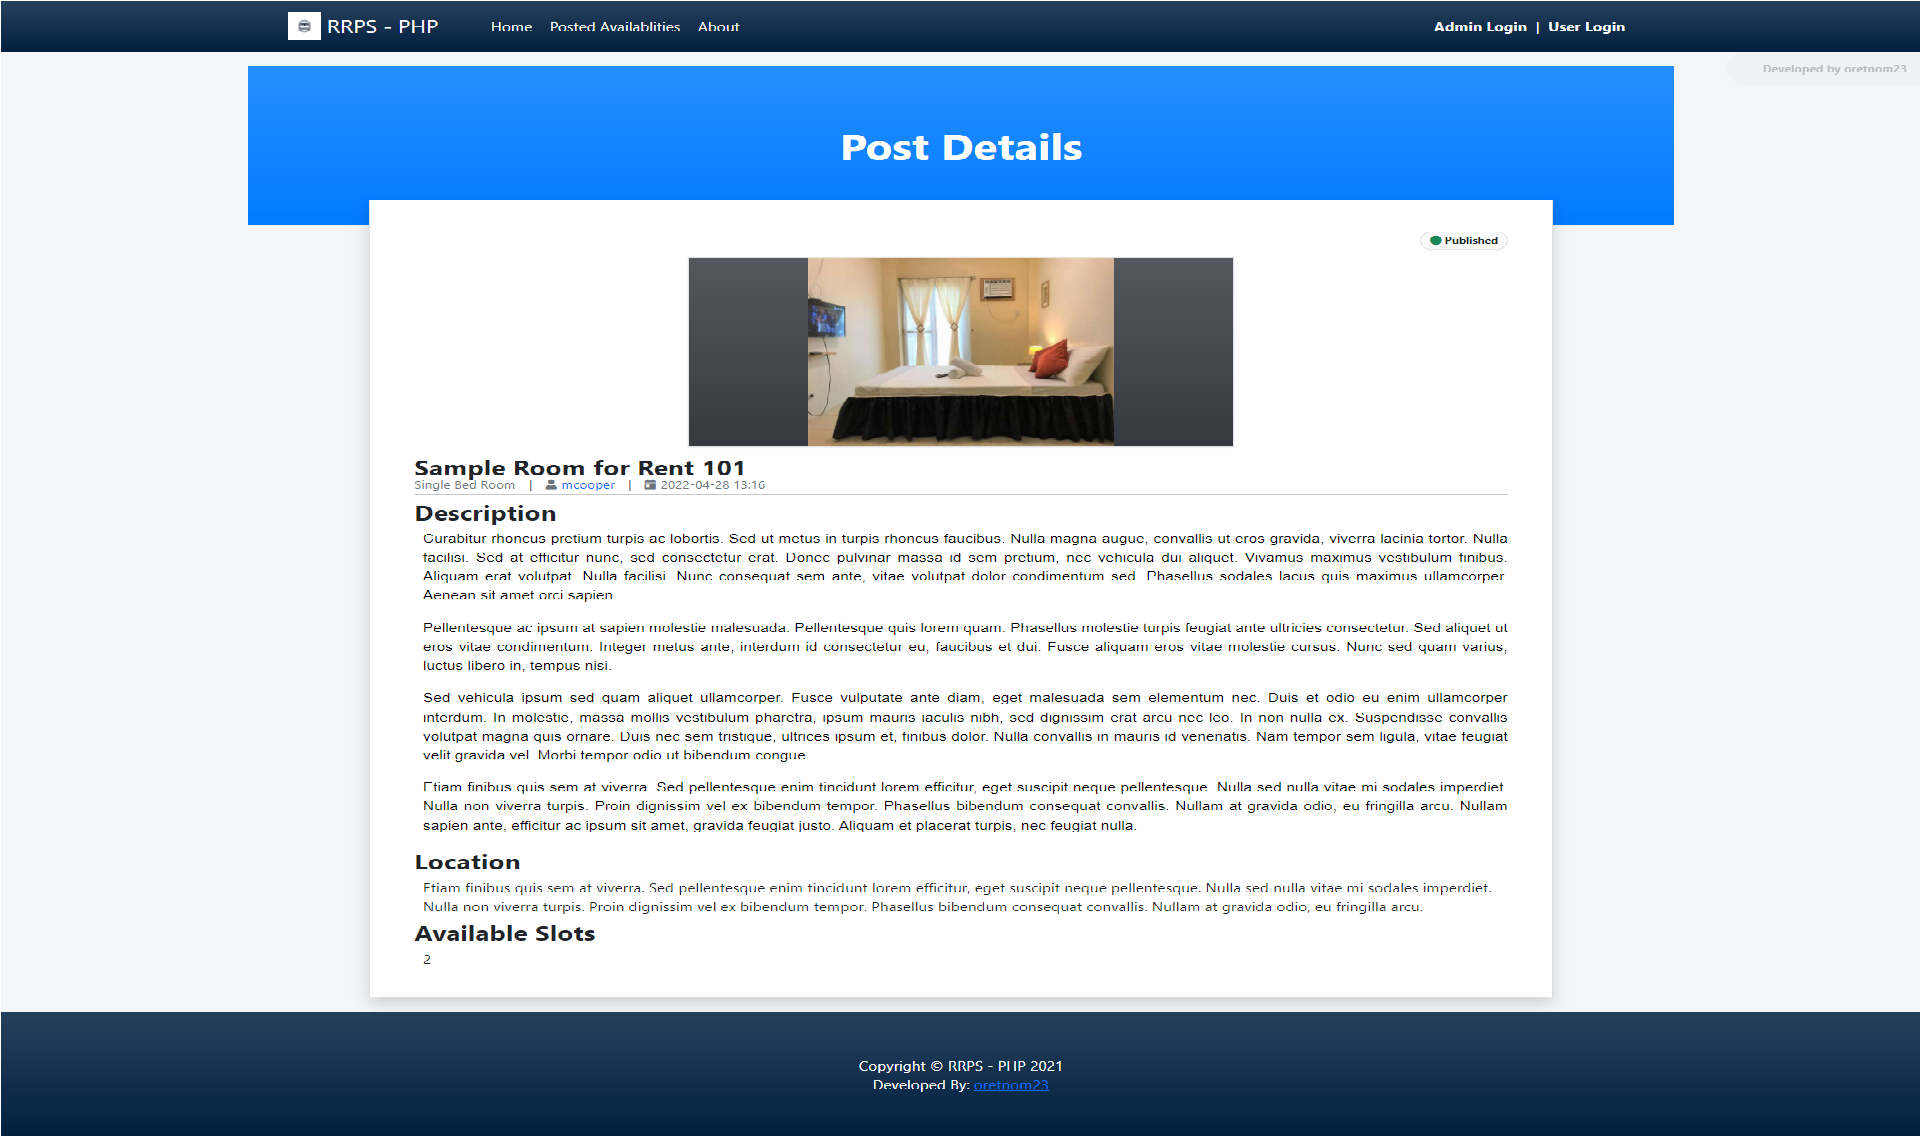 Room for Rent Portal Site